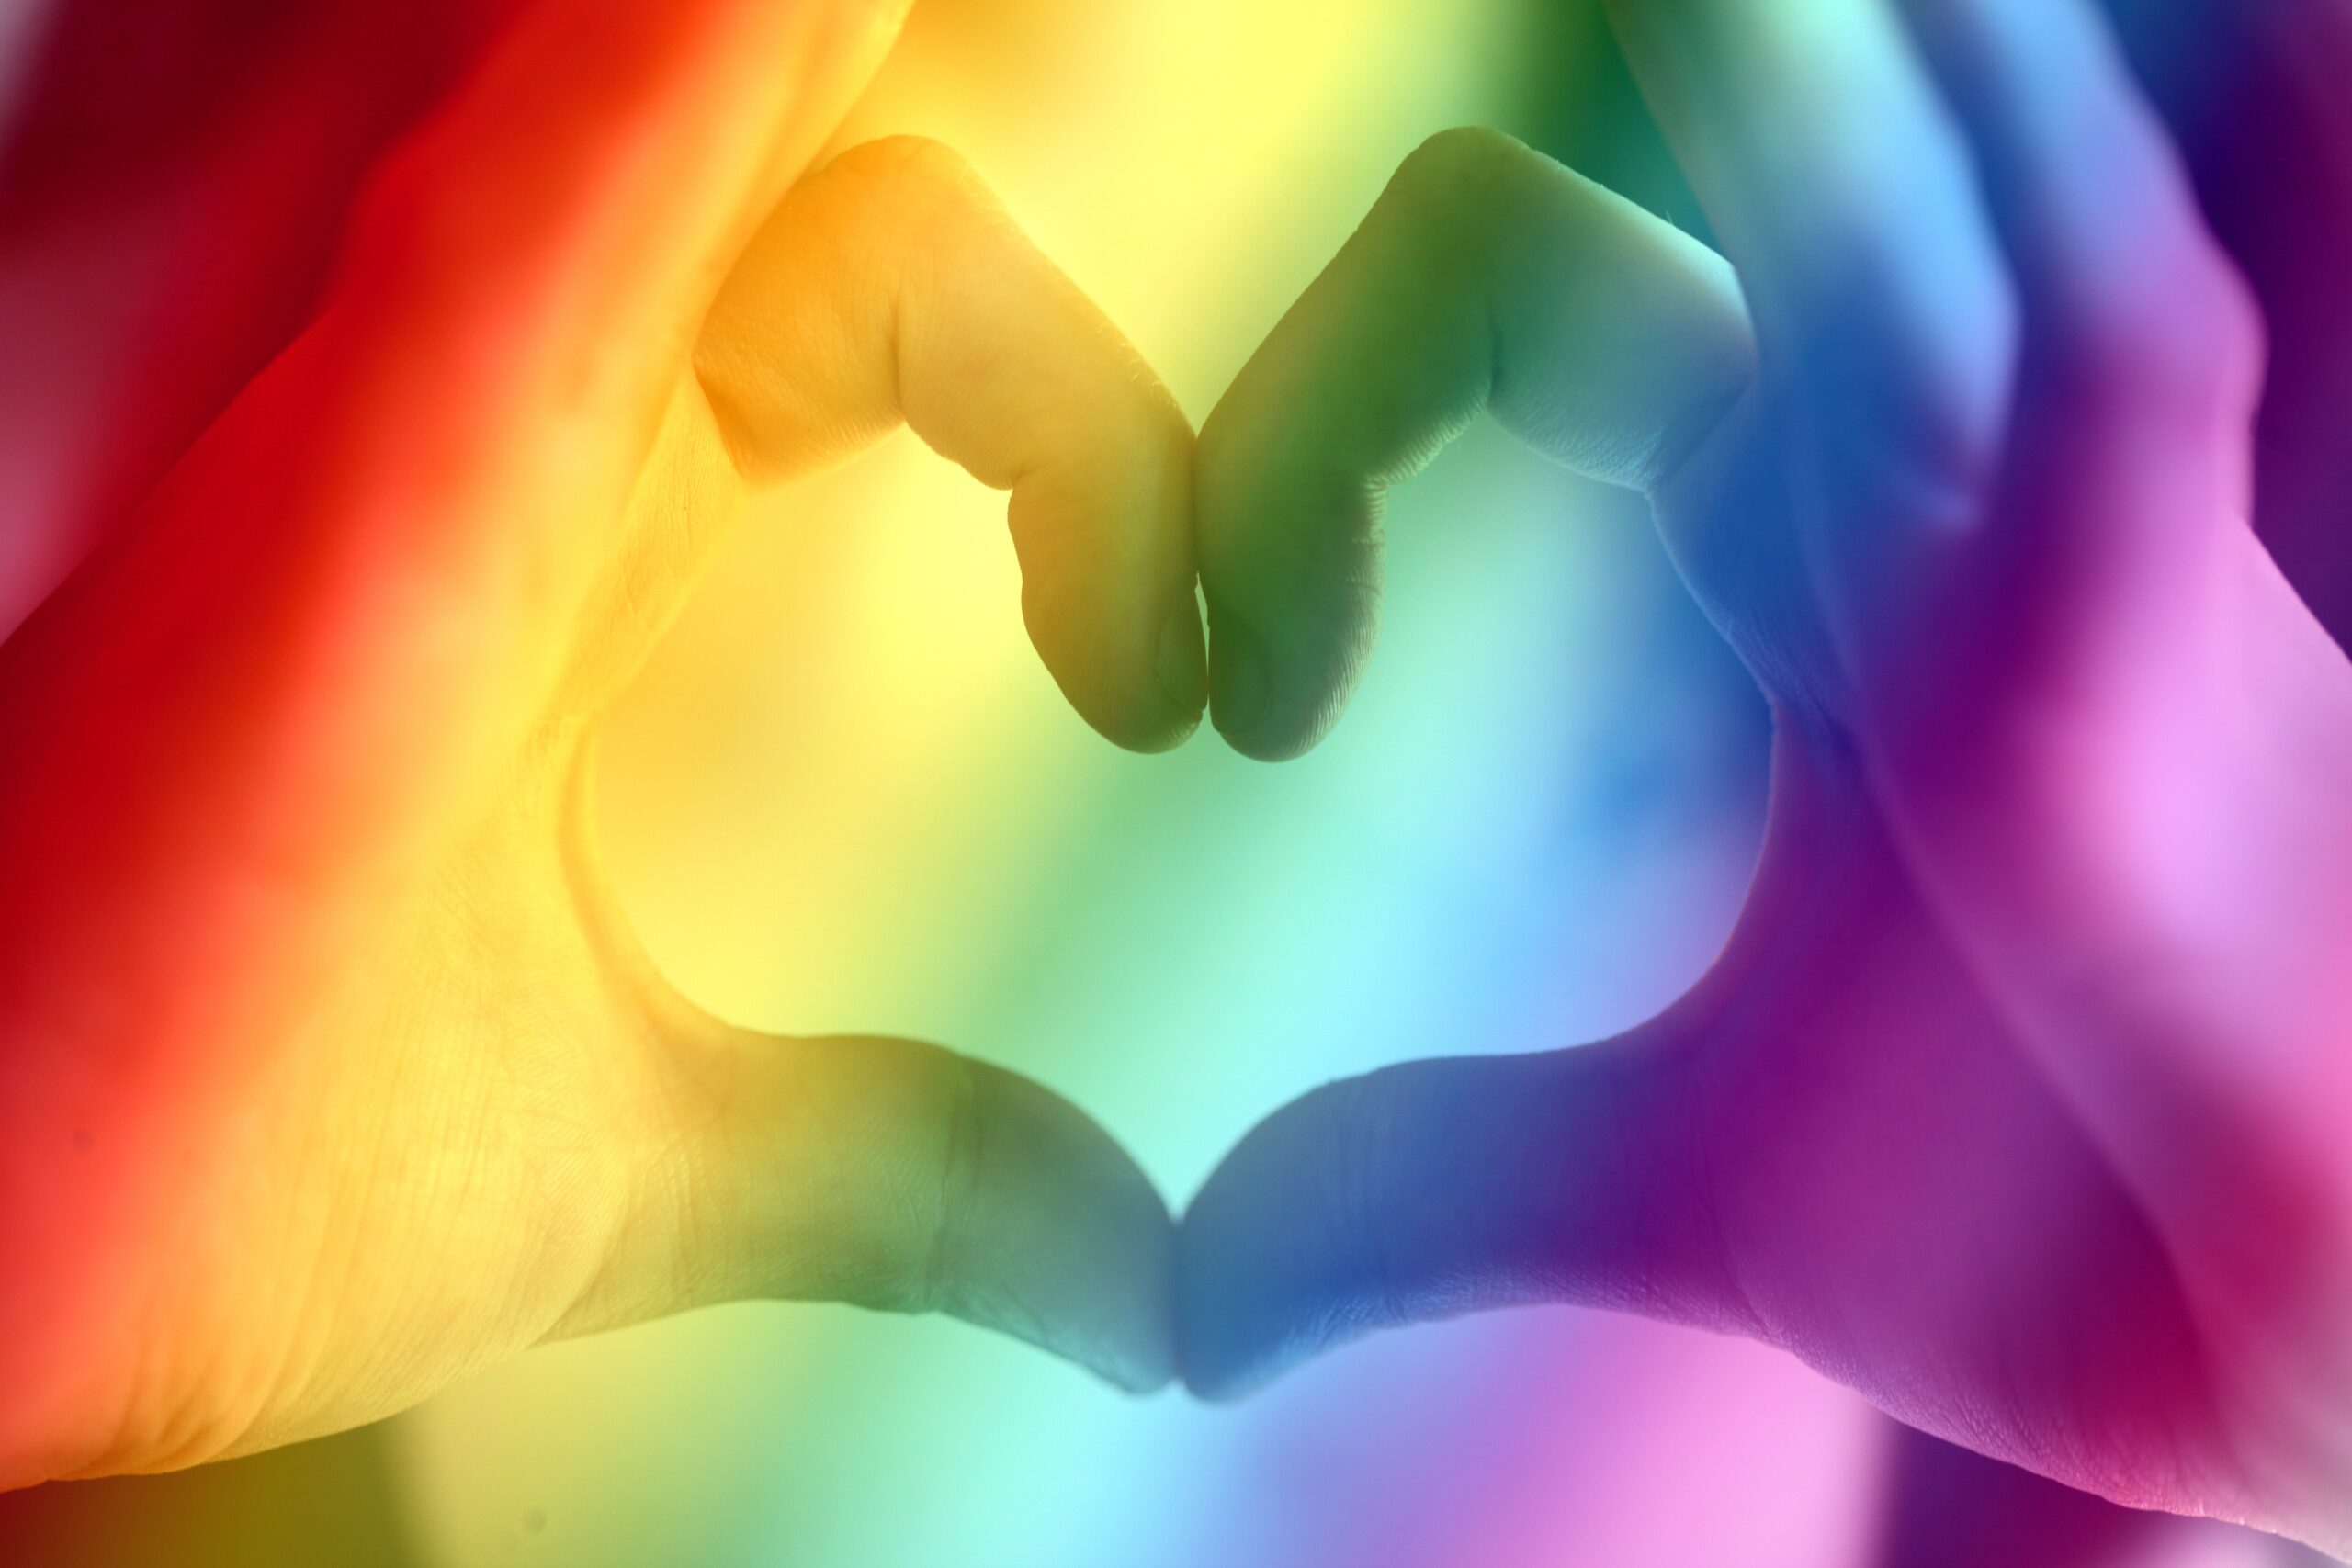 LGBTQ rainbow with hands making a heart